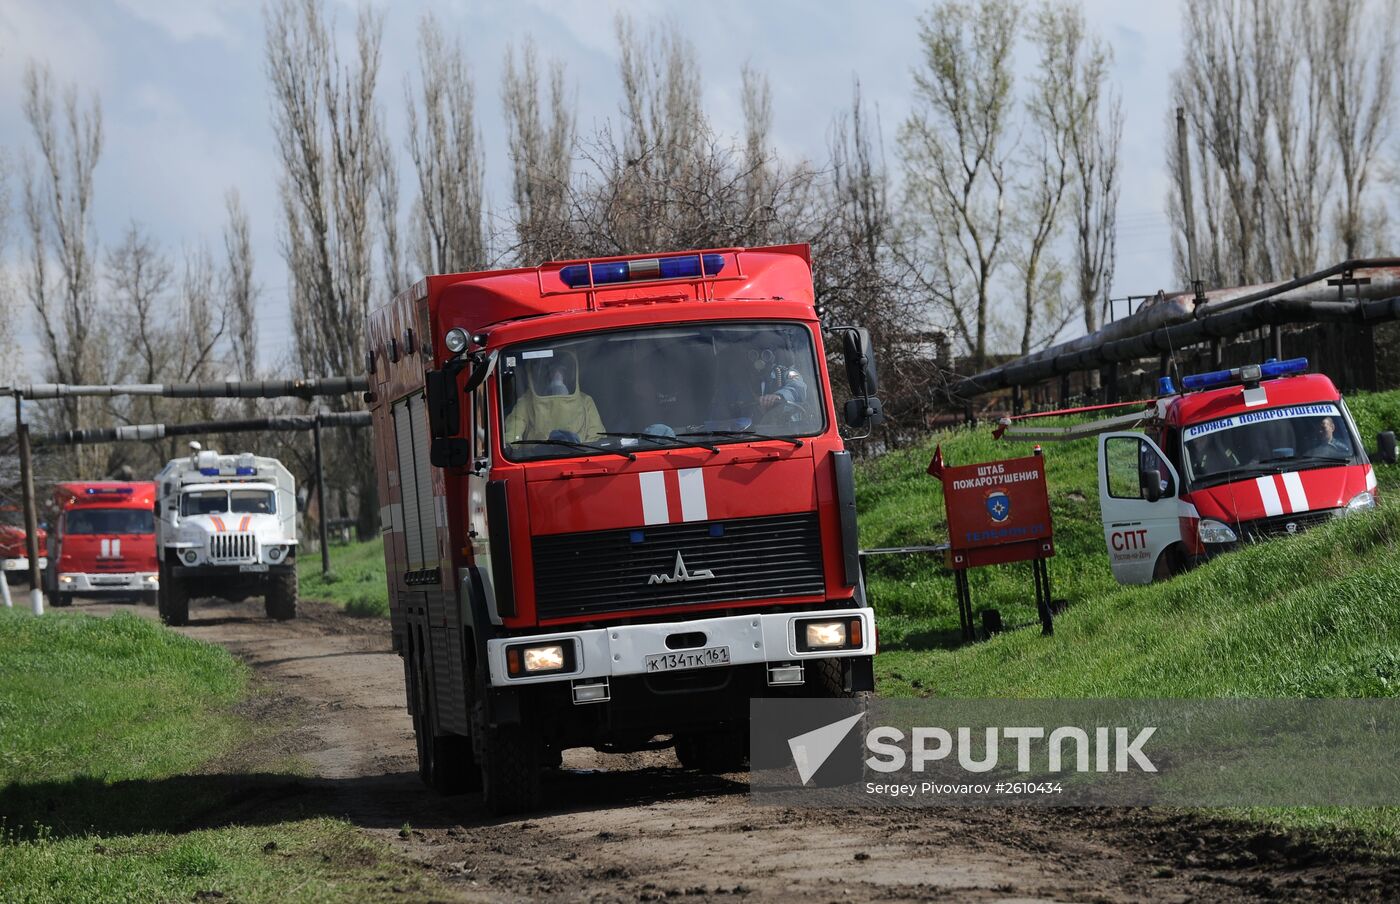 Emergencies Ministry drill in Rostov-on-Don